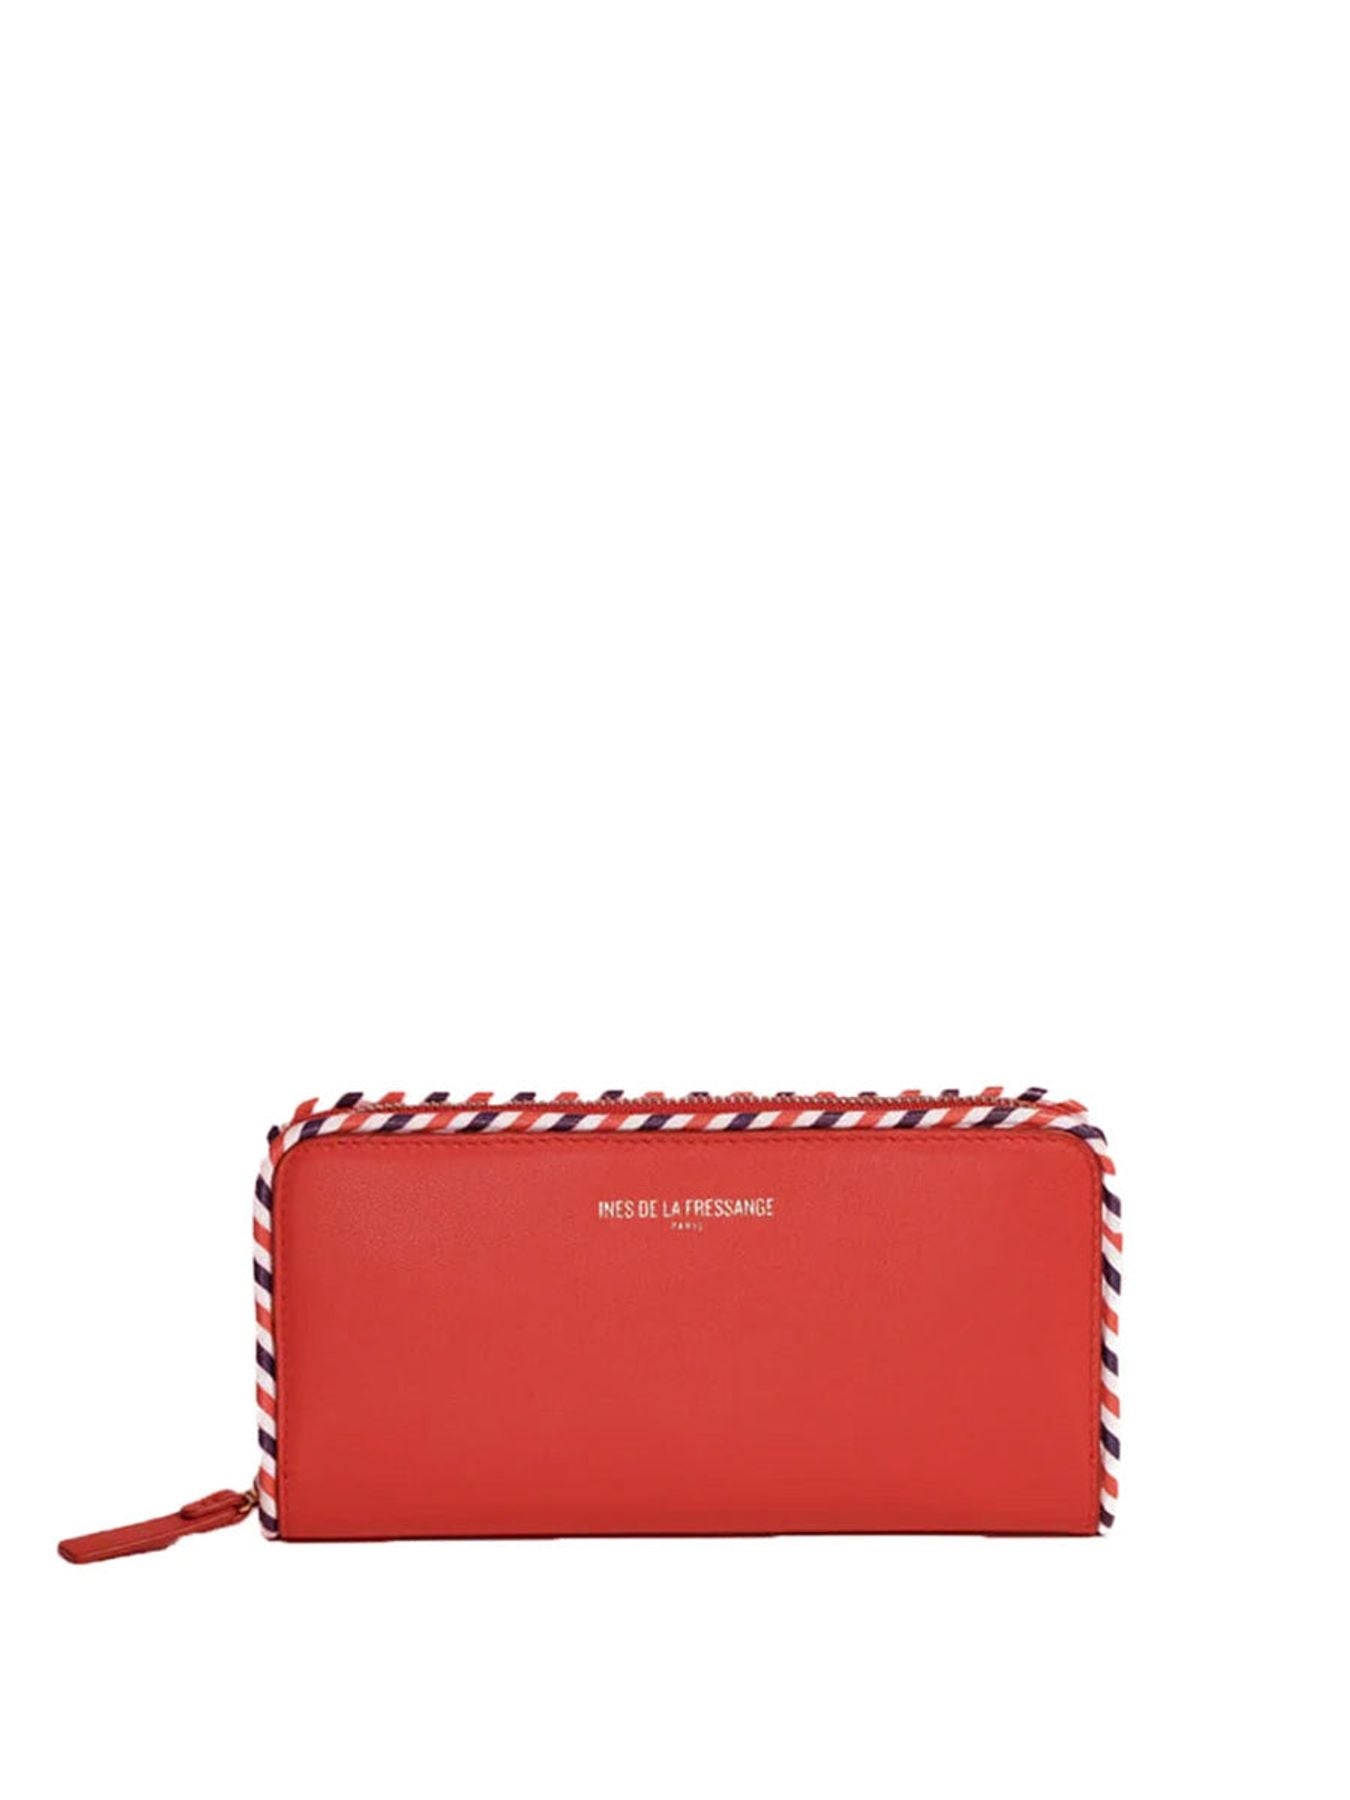 wallet-marcia-red